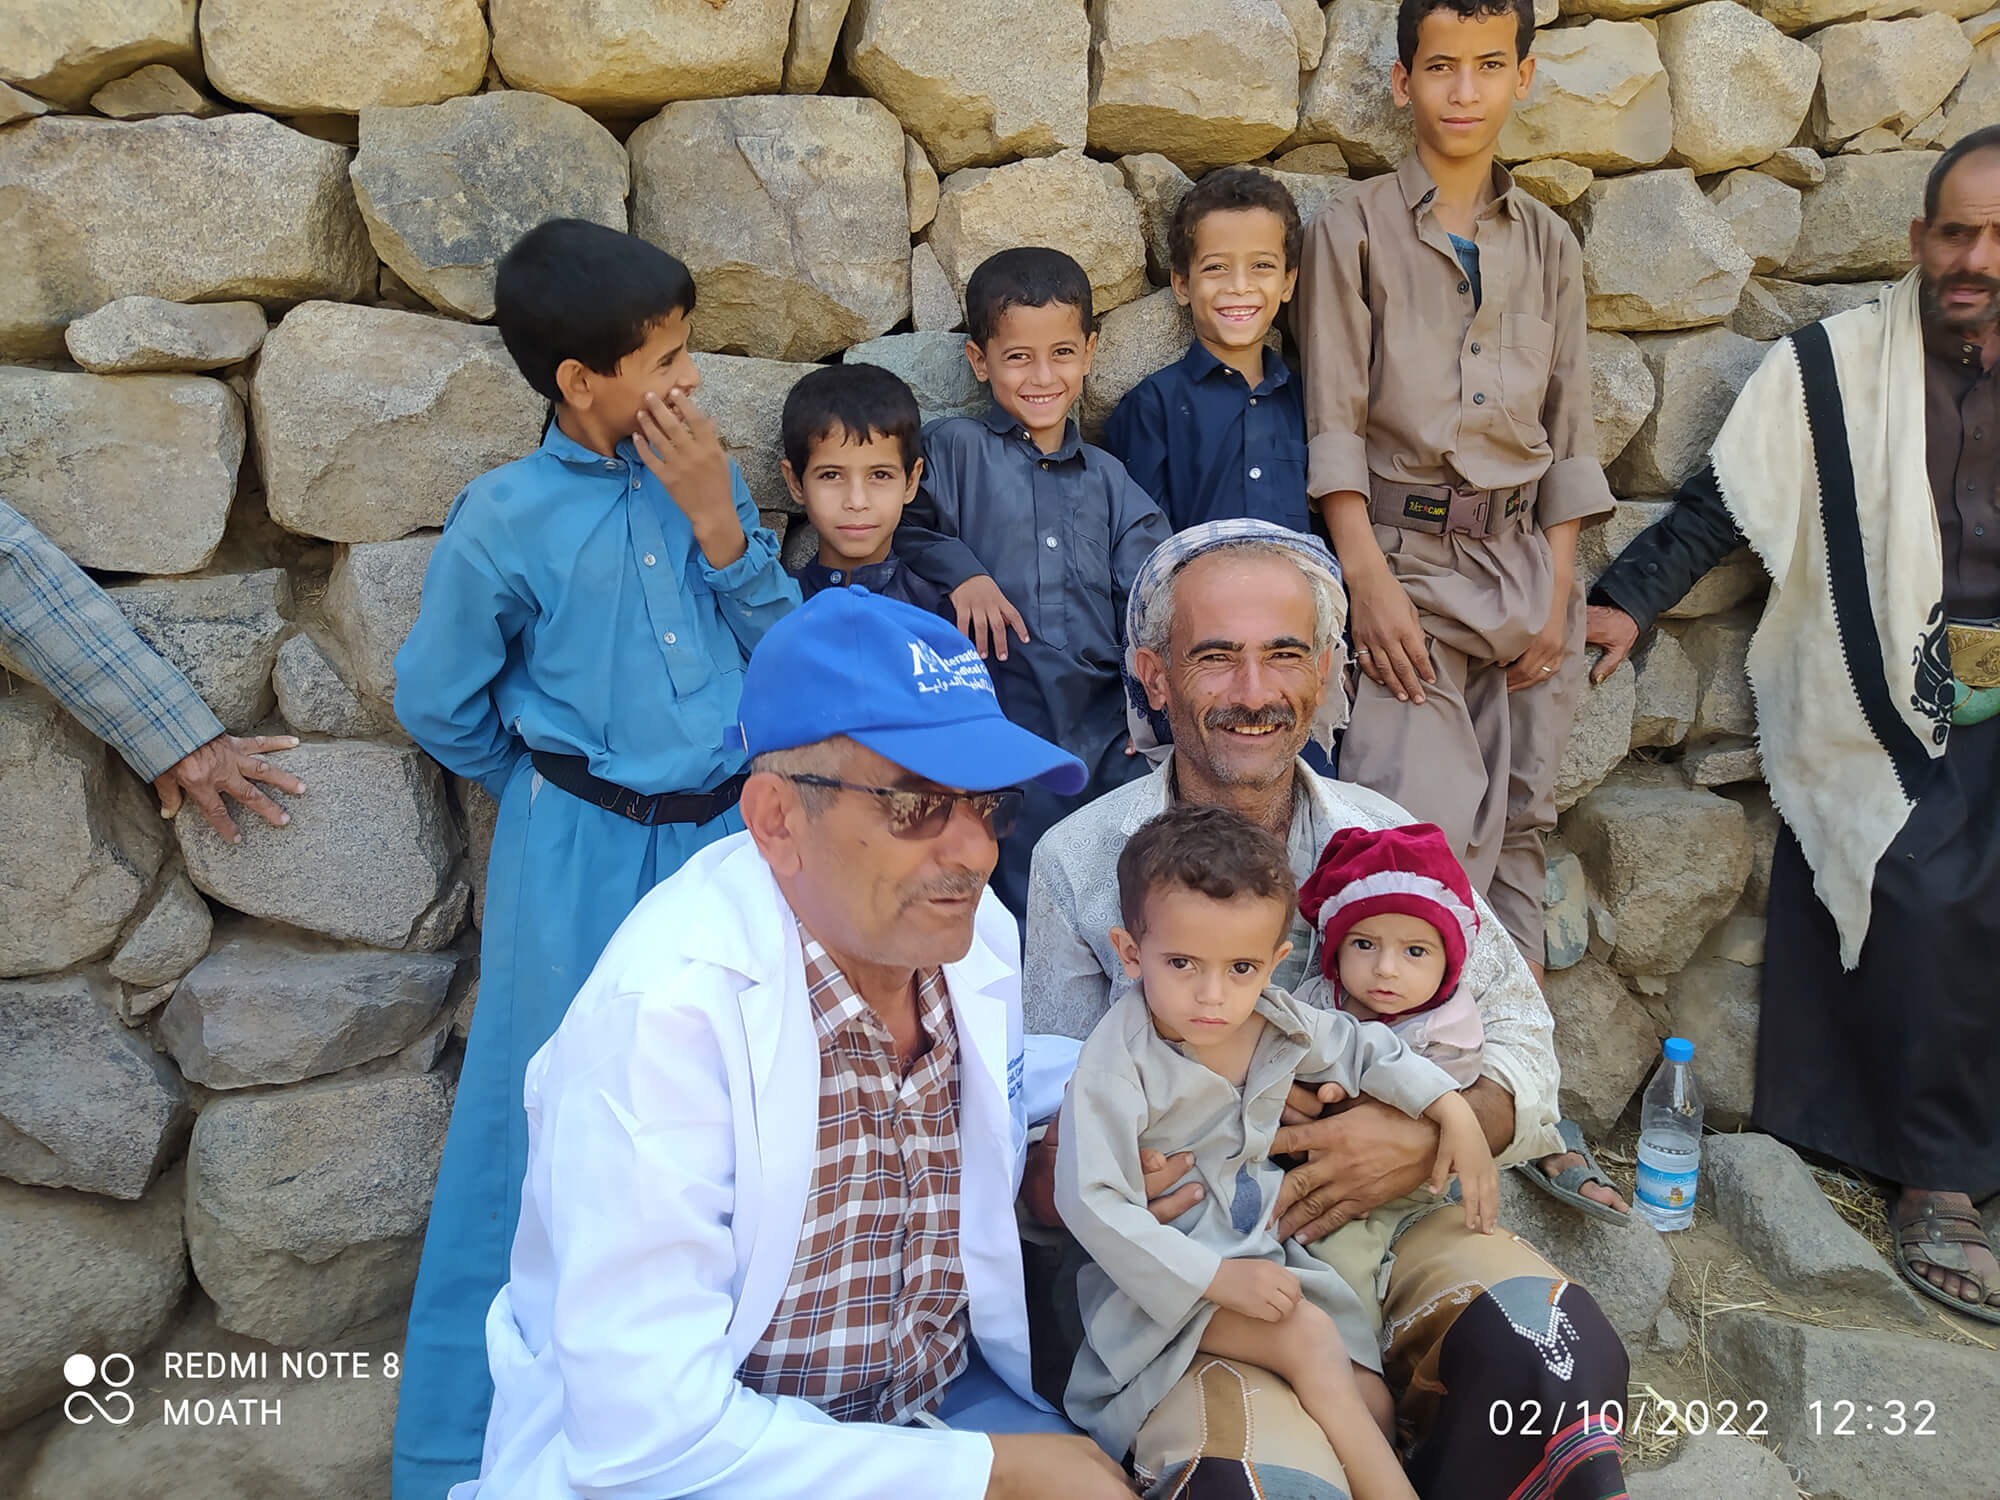 Faisal, a recipient of International Medical Corps' unconditional cash transfer, is shown with seven of his children.